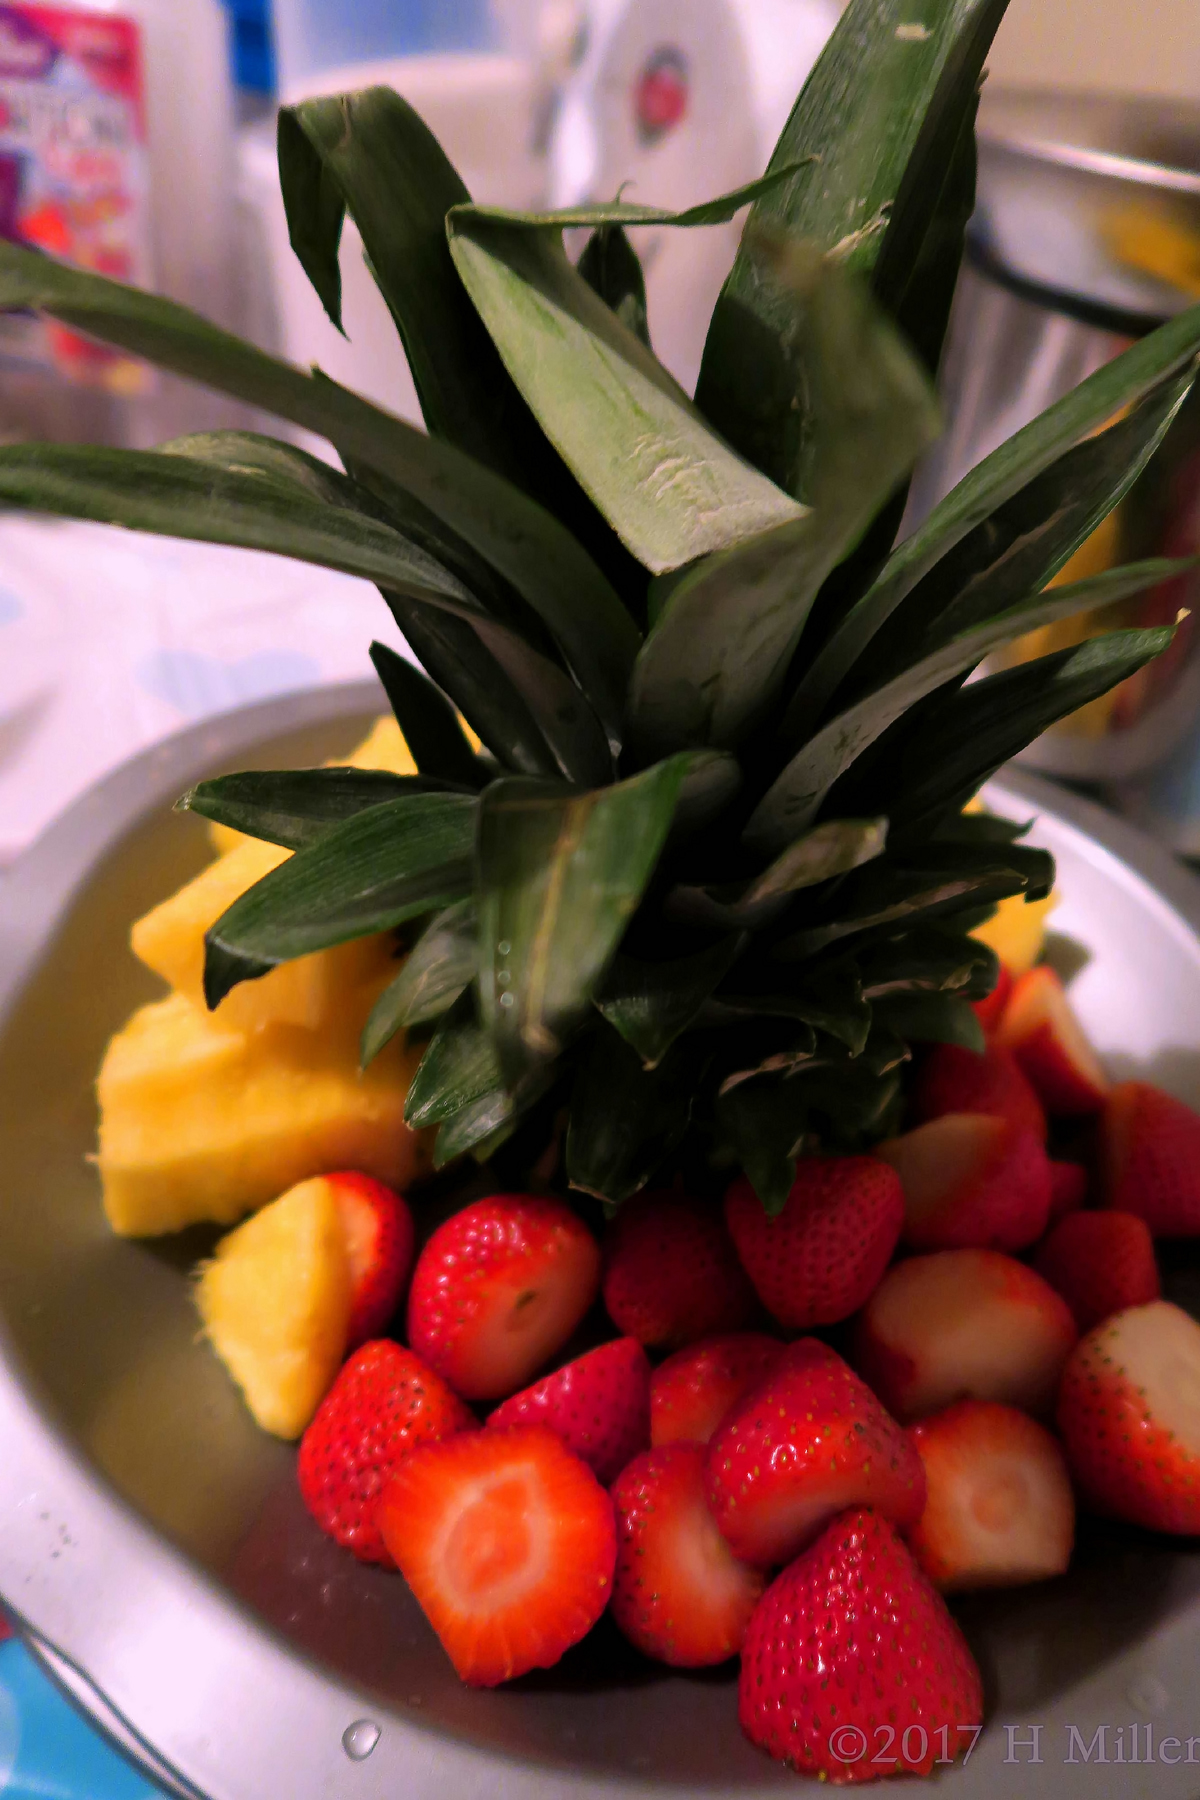 Red Strawberries And Yellow Pineapple Looks Even More Tasty Together! 